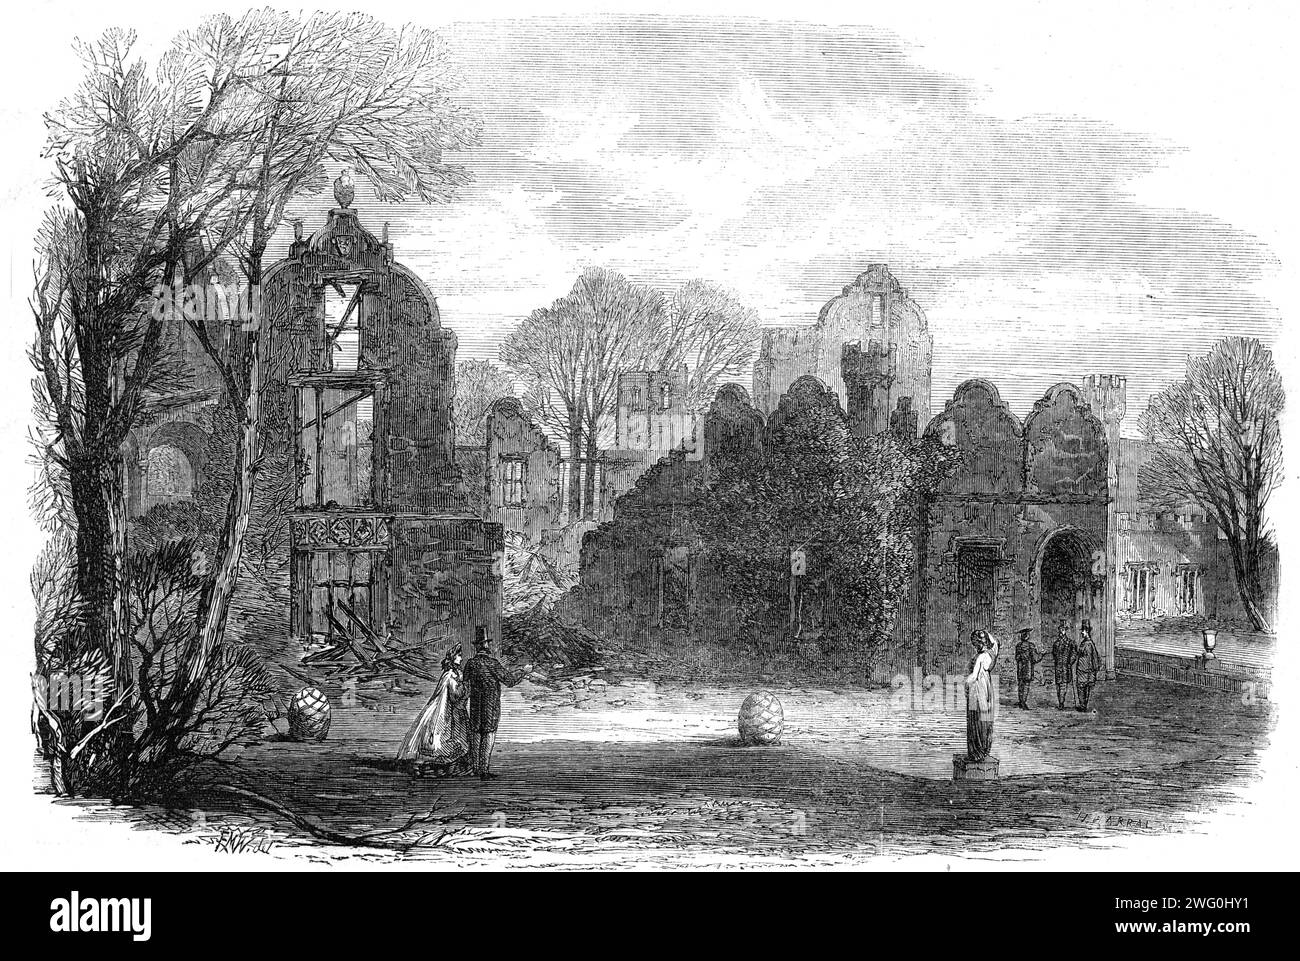 The late fire at Campden House [Kensington]: view of the garden front, showing the remains of the theatre, 1862. 'On the morning of Sunday week...a fire broke out at Campden House, and in the course of a few hours left nothing standing but the shattered walls...Two hundred and fifty years have passed since Sir Baptist Hickes, a wealthy silk mercer, of Cheapside...erected the mansion...the date is said to be about 1612...Princess, afterwards Queen, Anne...resided [here] for some time with her husband, Prince George of Denmark...The Princess made an addition to Campden House at the western, end, Stock Photo